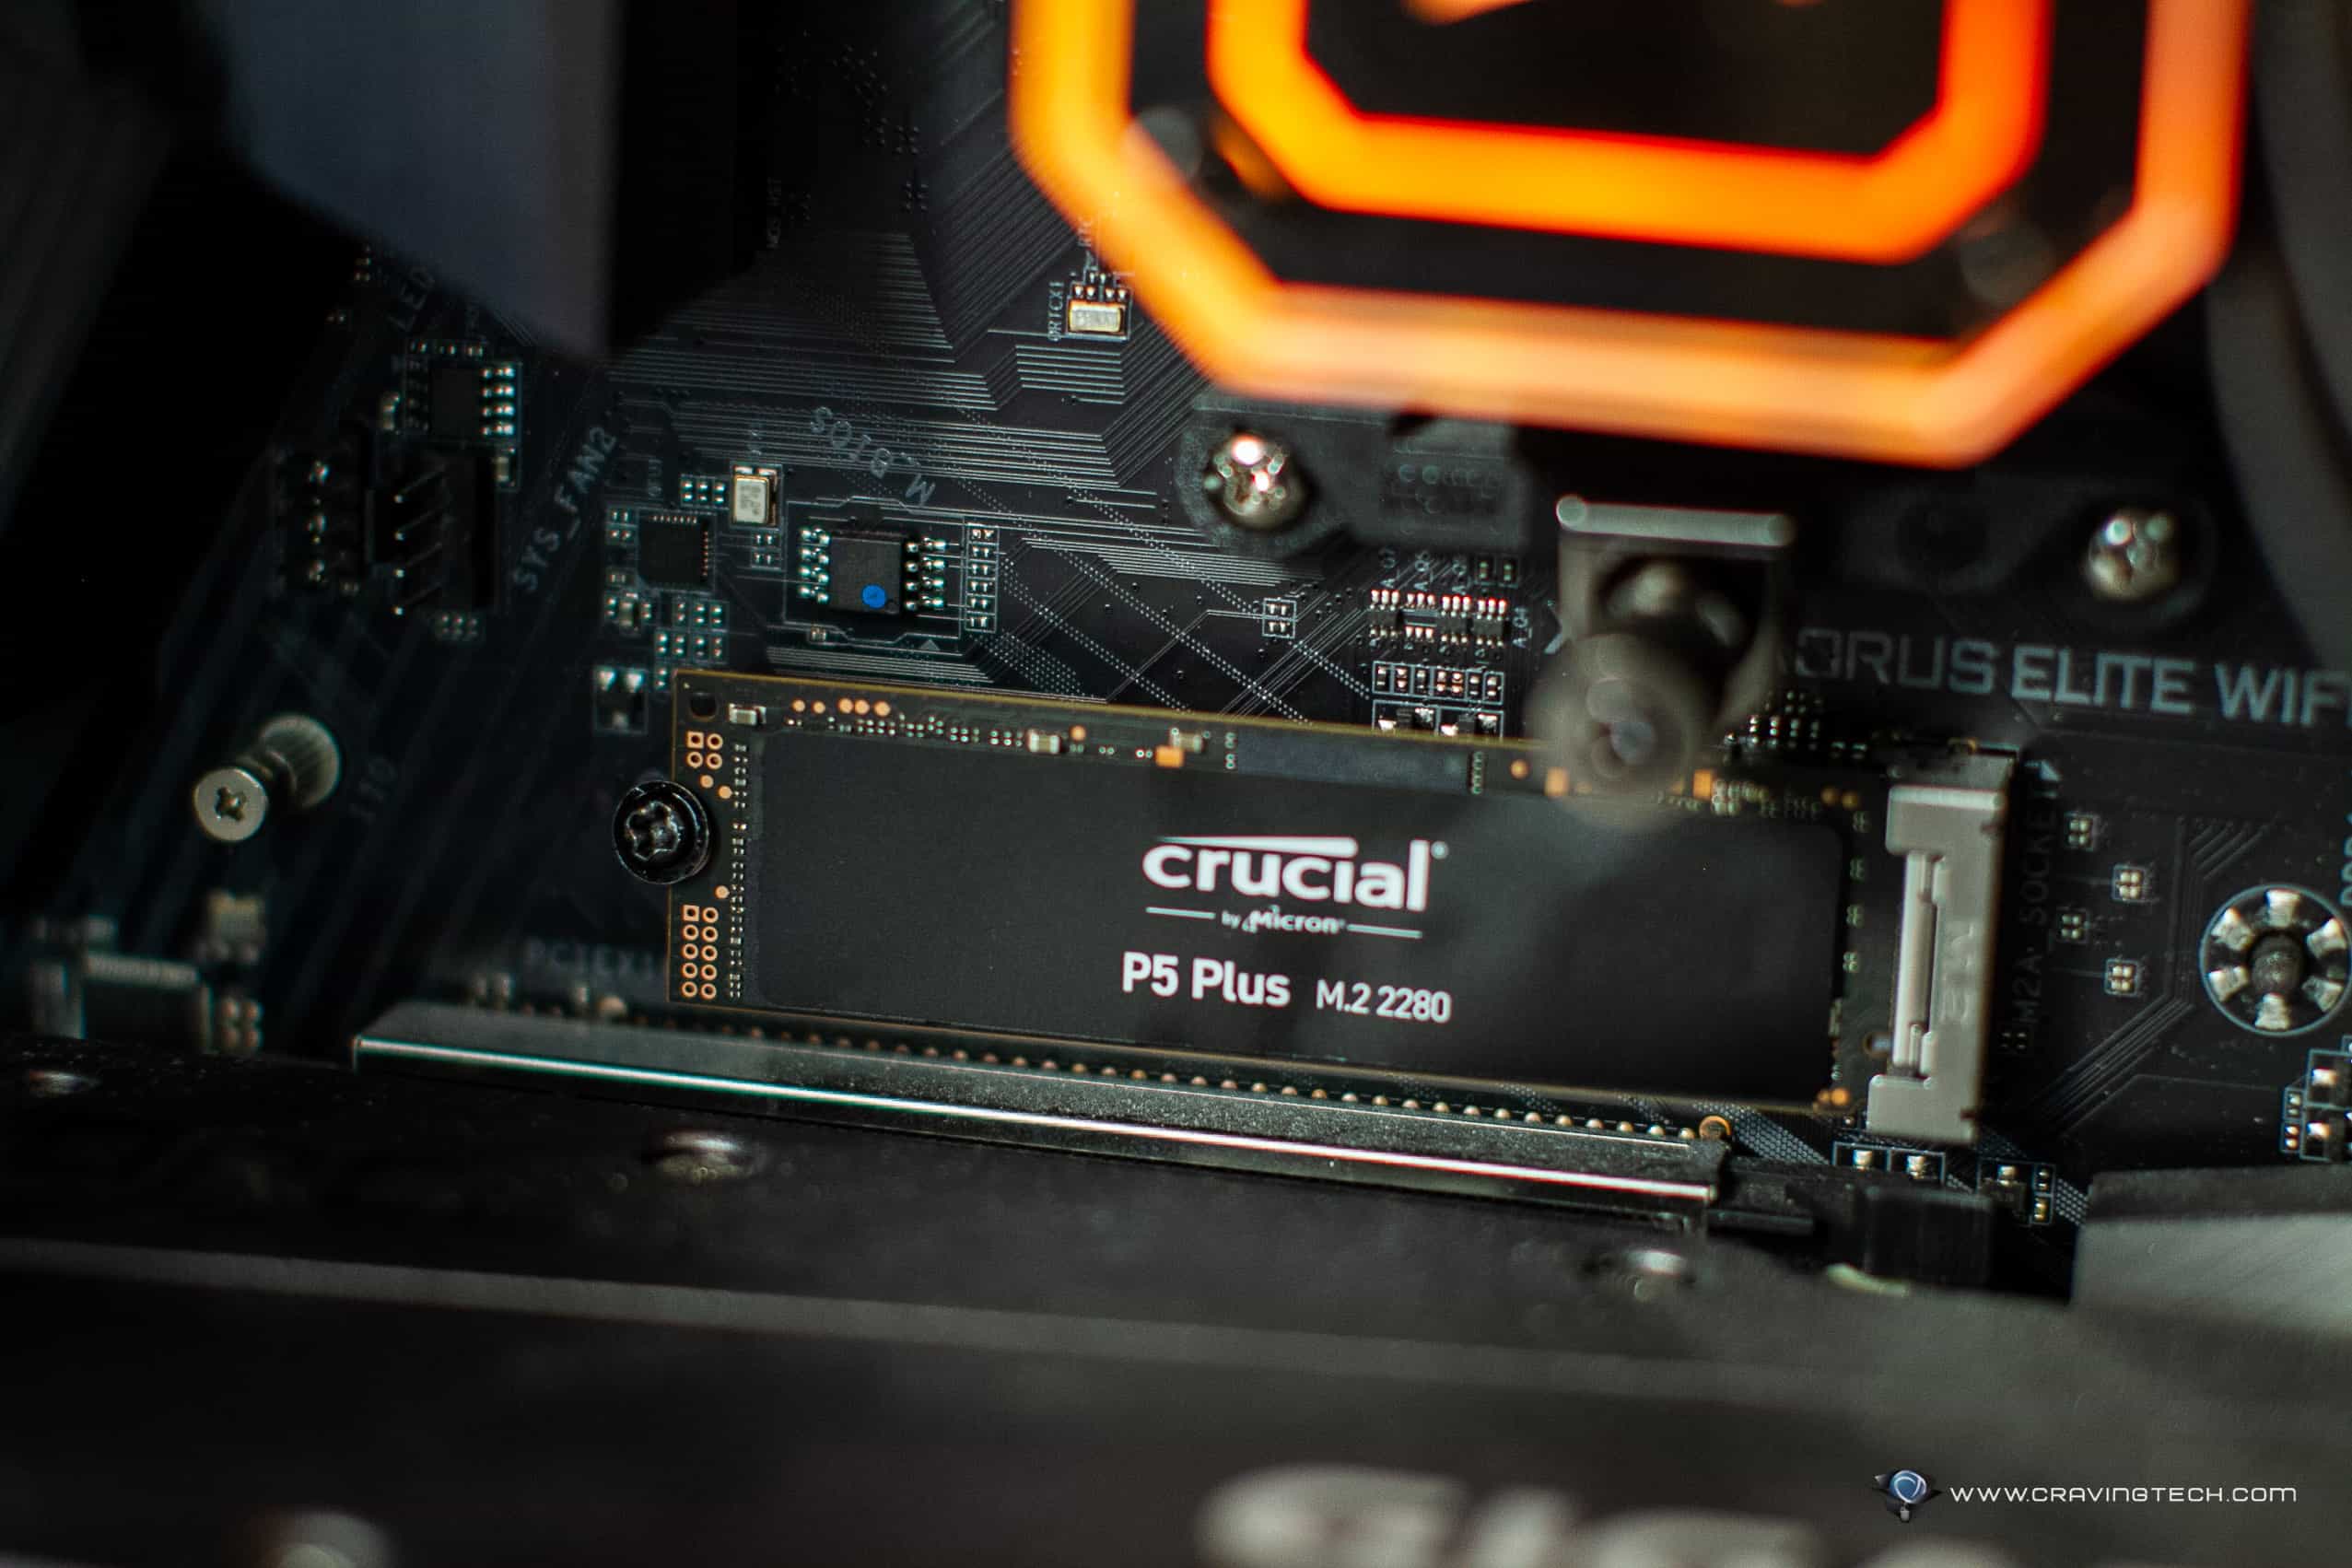 A very fast and affordable NVMe SSD – Crucial P5 Plus NVMe SSD Review